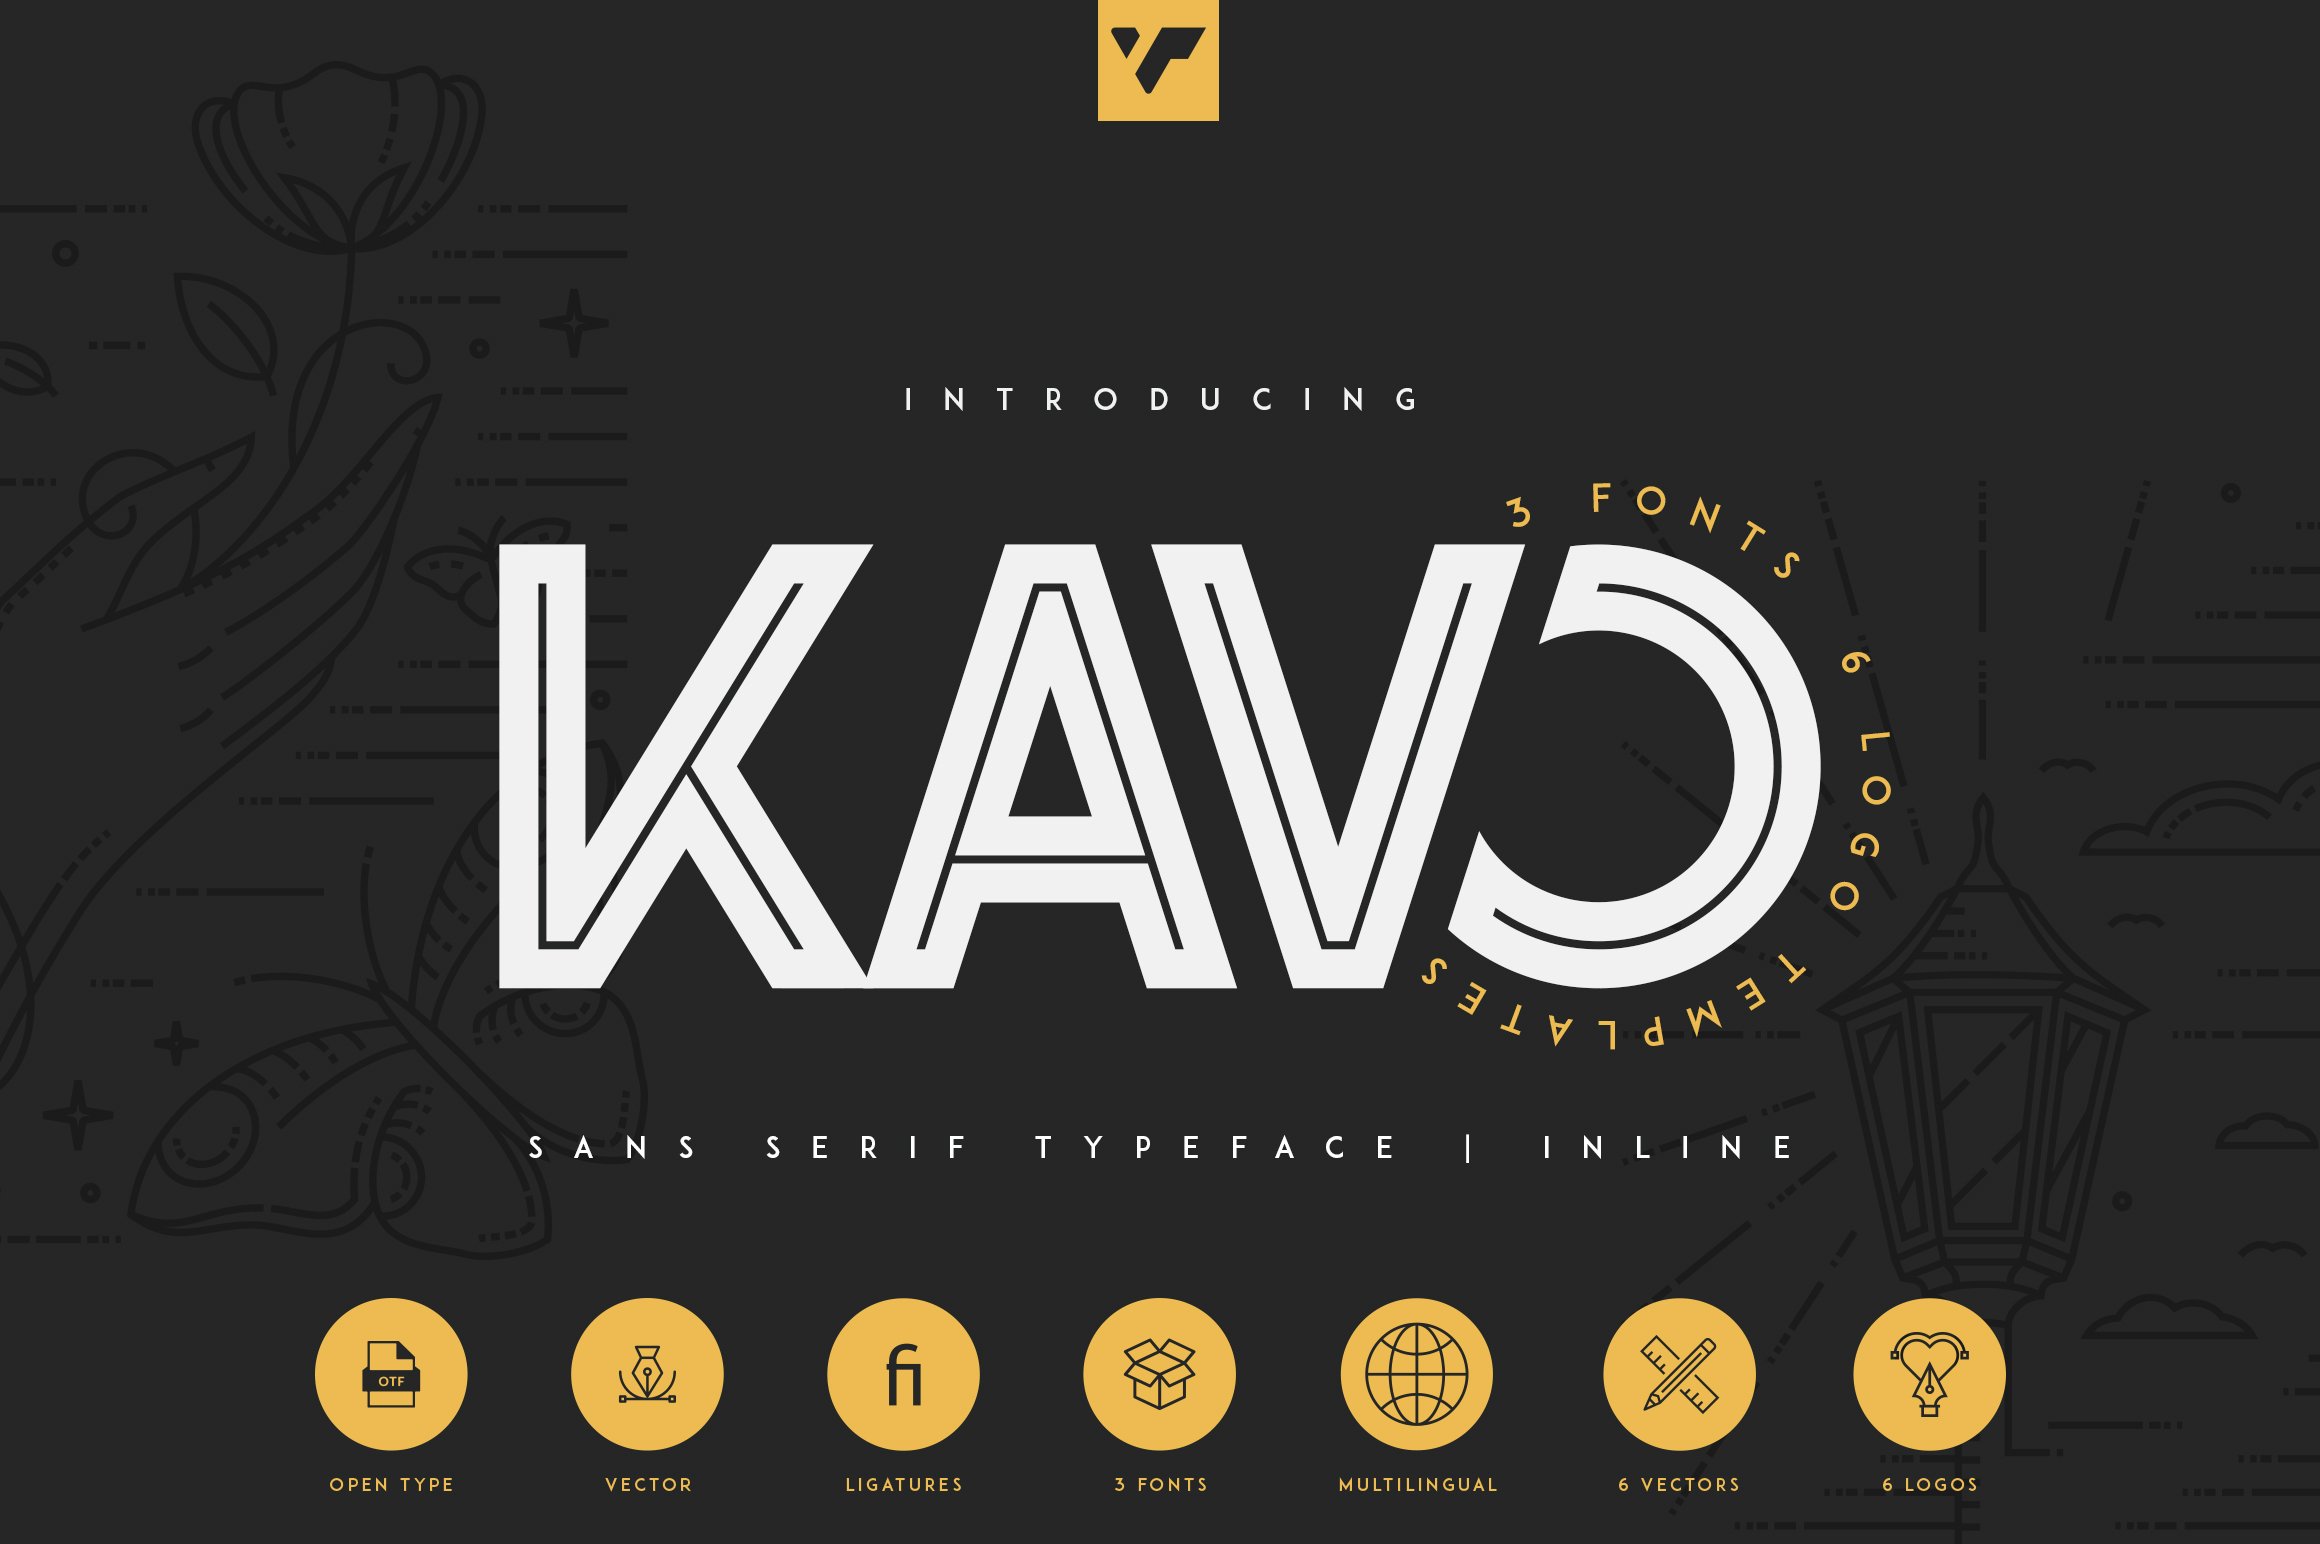 Kavo Inline | 3 fonts + 6 Logos cover image.